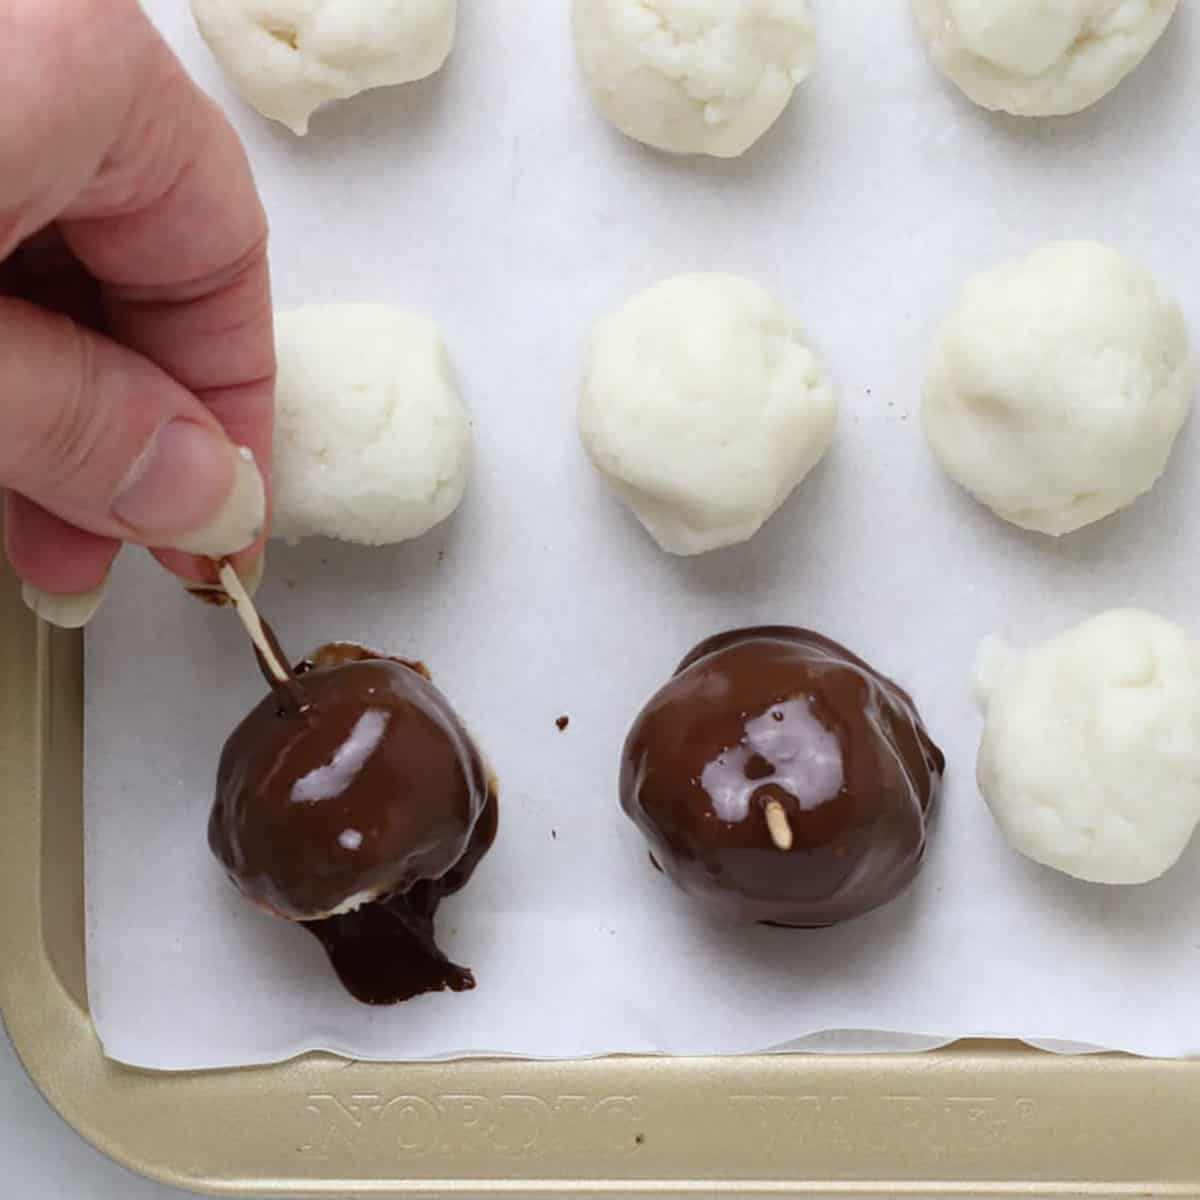 Dipping coconut truffles in melted chocolate.